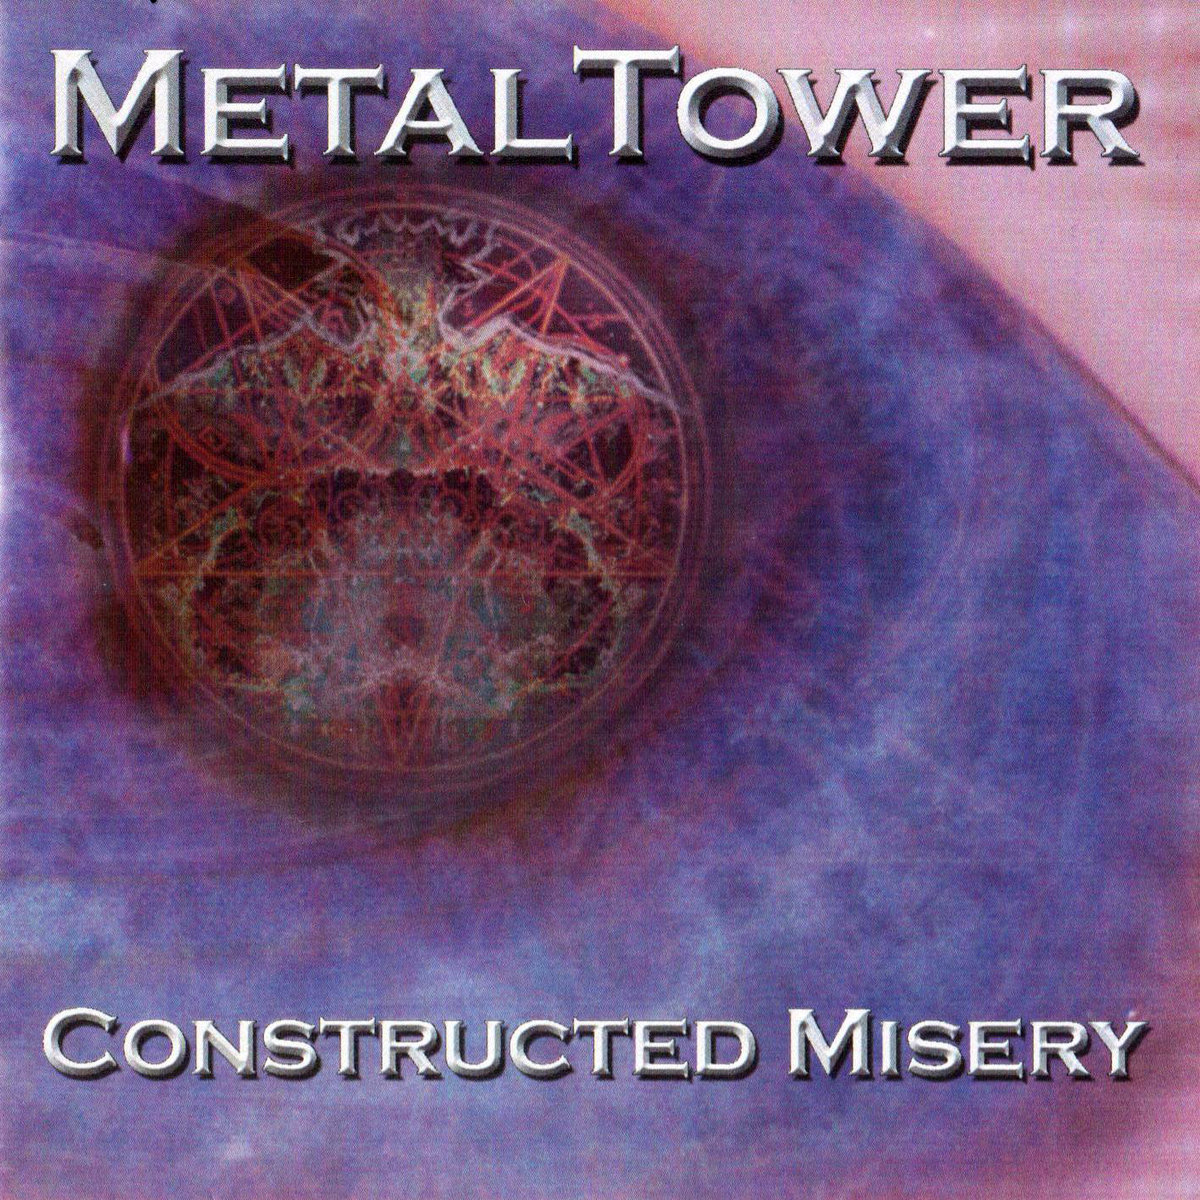 MetalTower - Constructed Misery